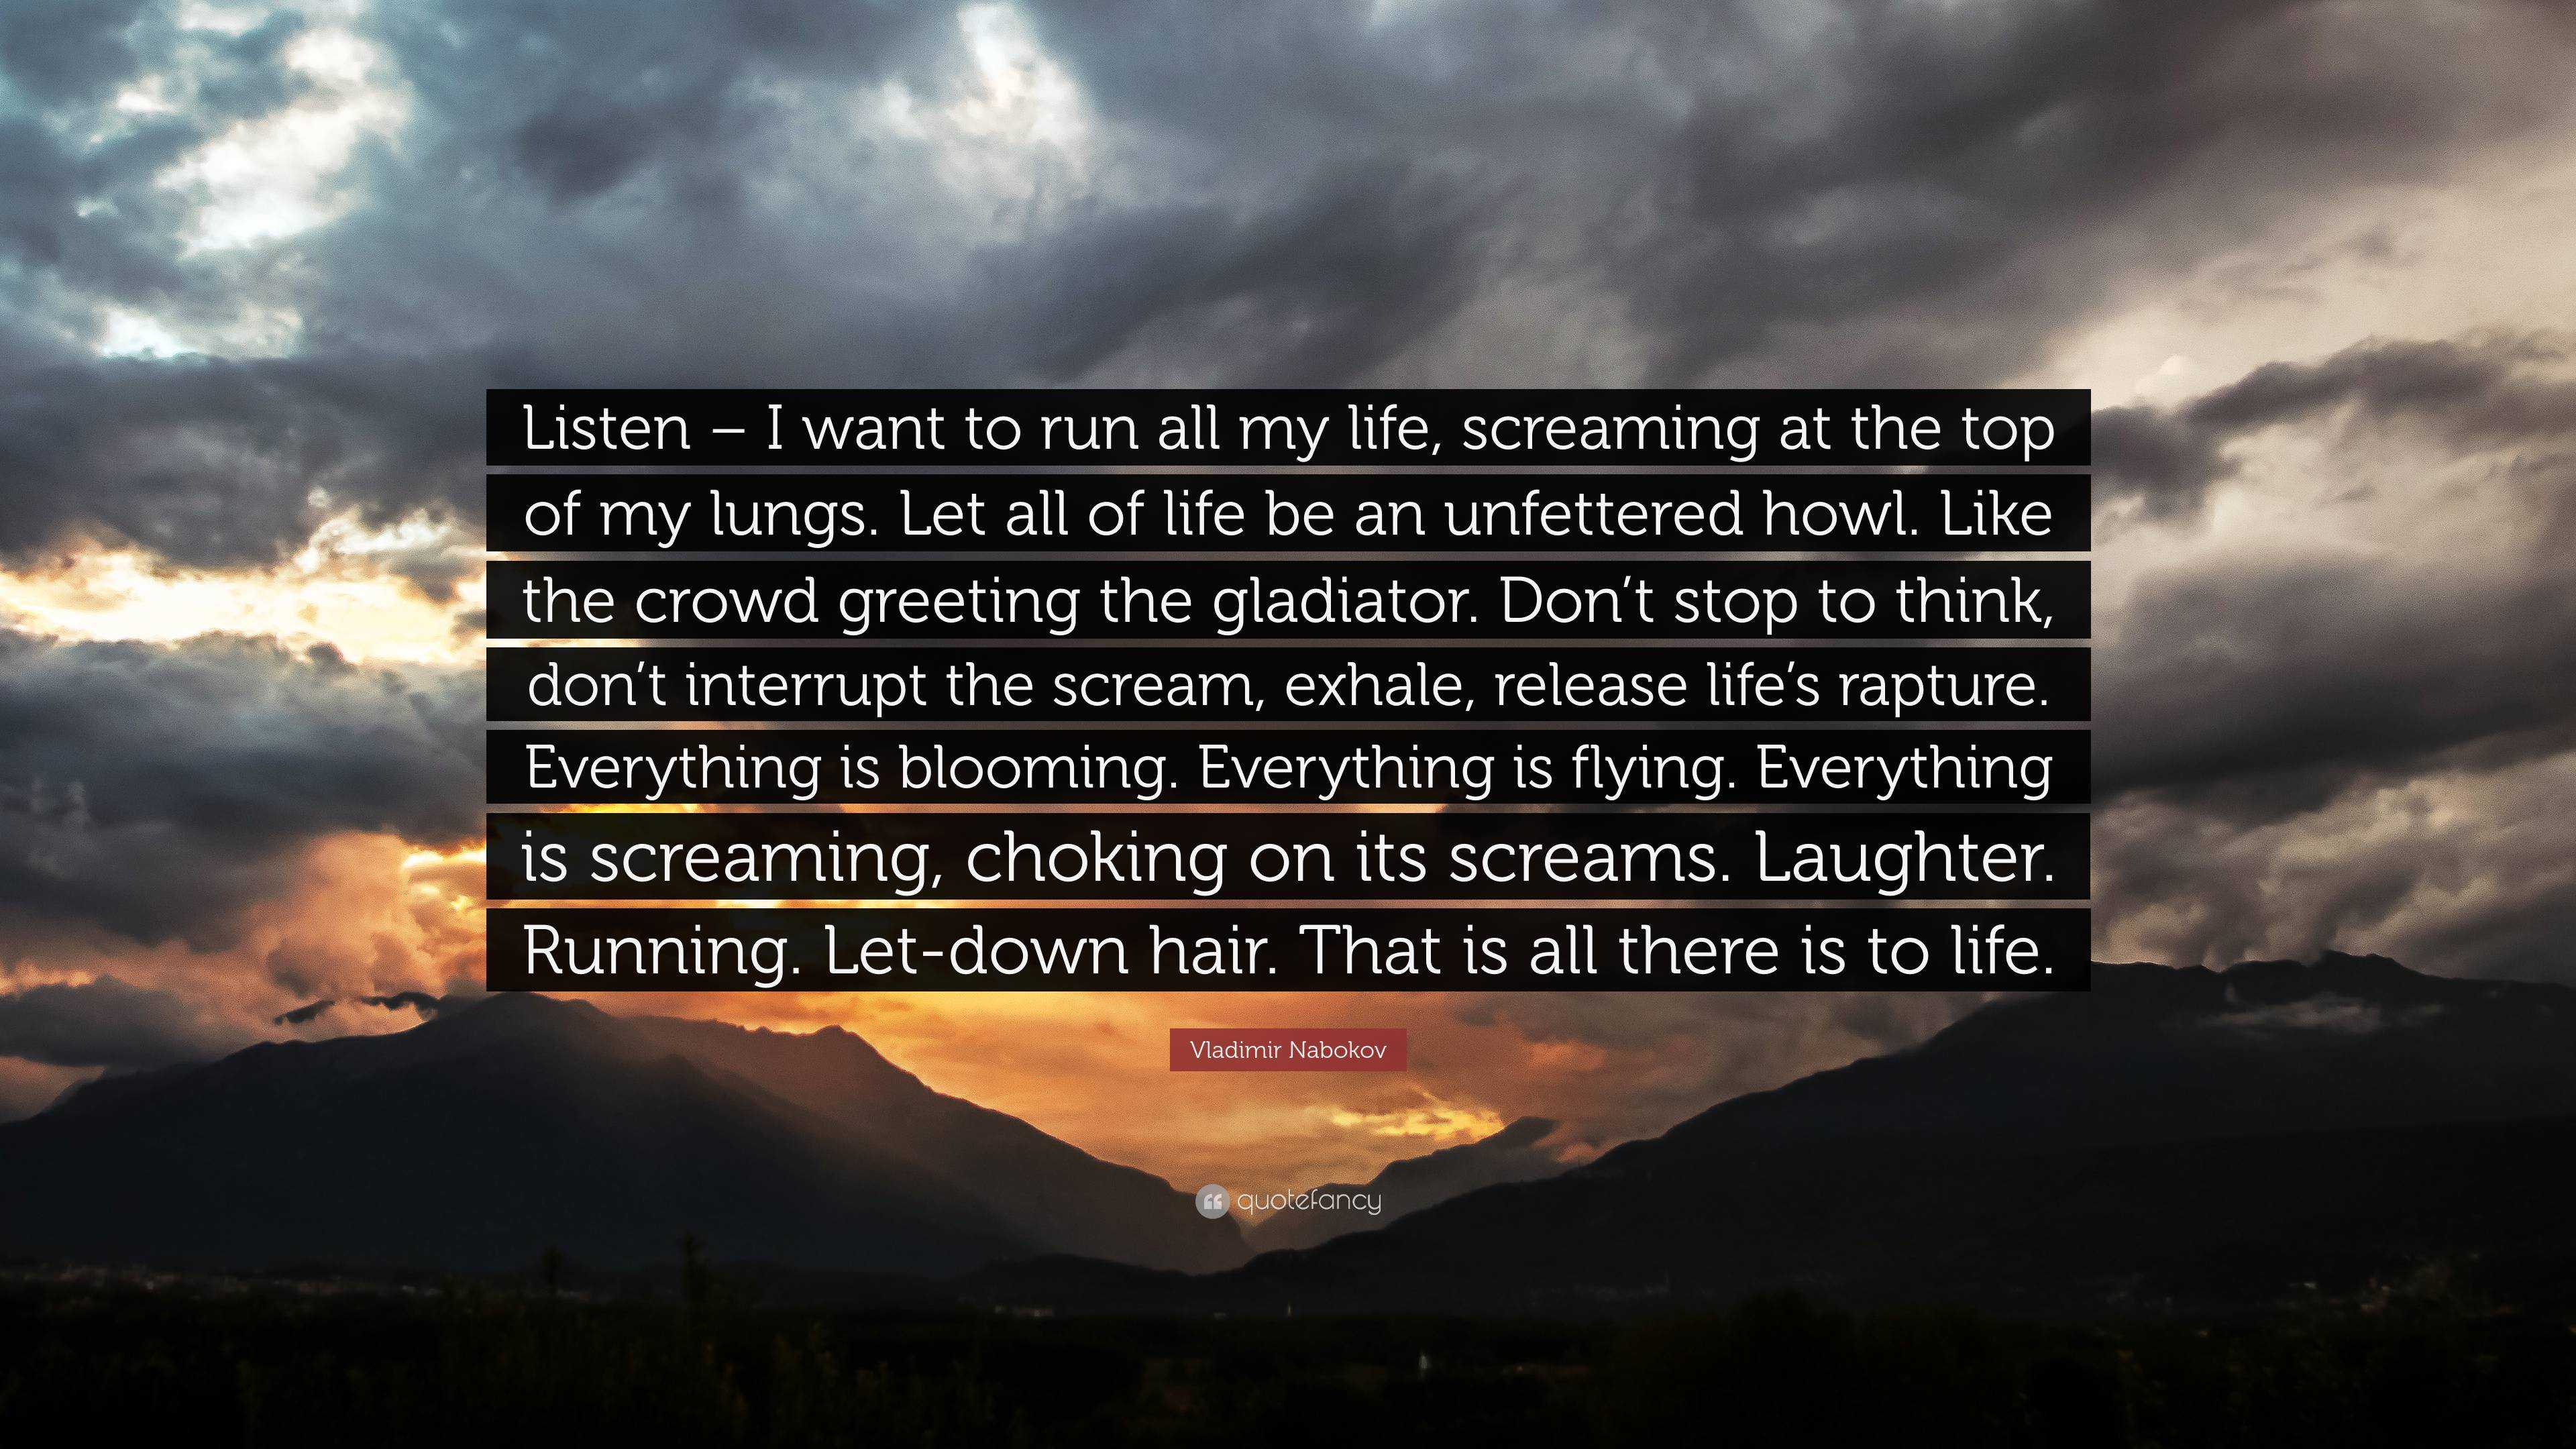 Vladimir Nabokov Quote: “Listen – I want to run all my life, screaming at  the top of my lungs. Let all of life be an unfettered howl. Like the cr...”